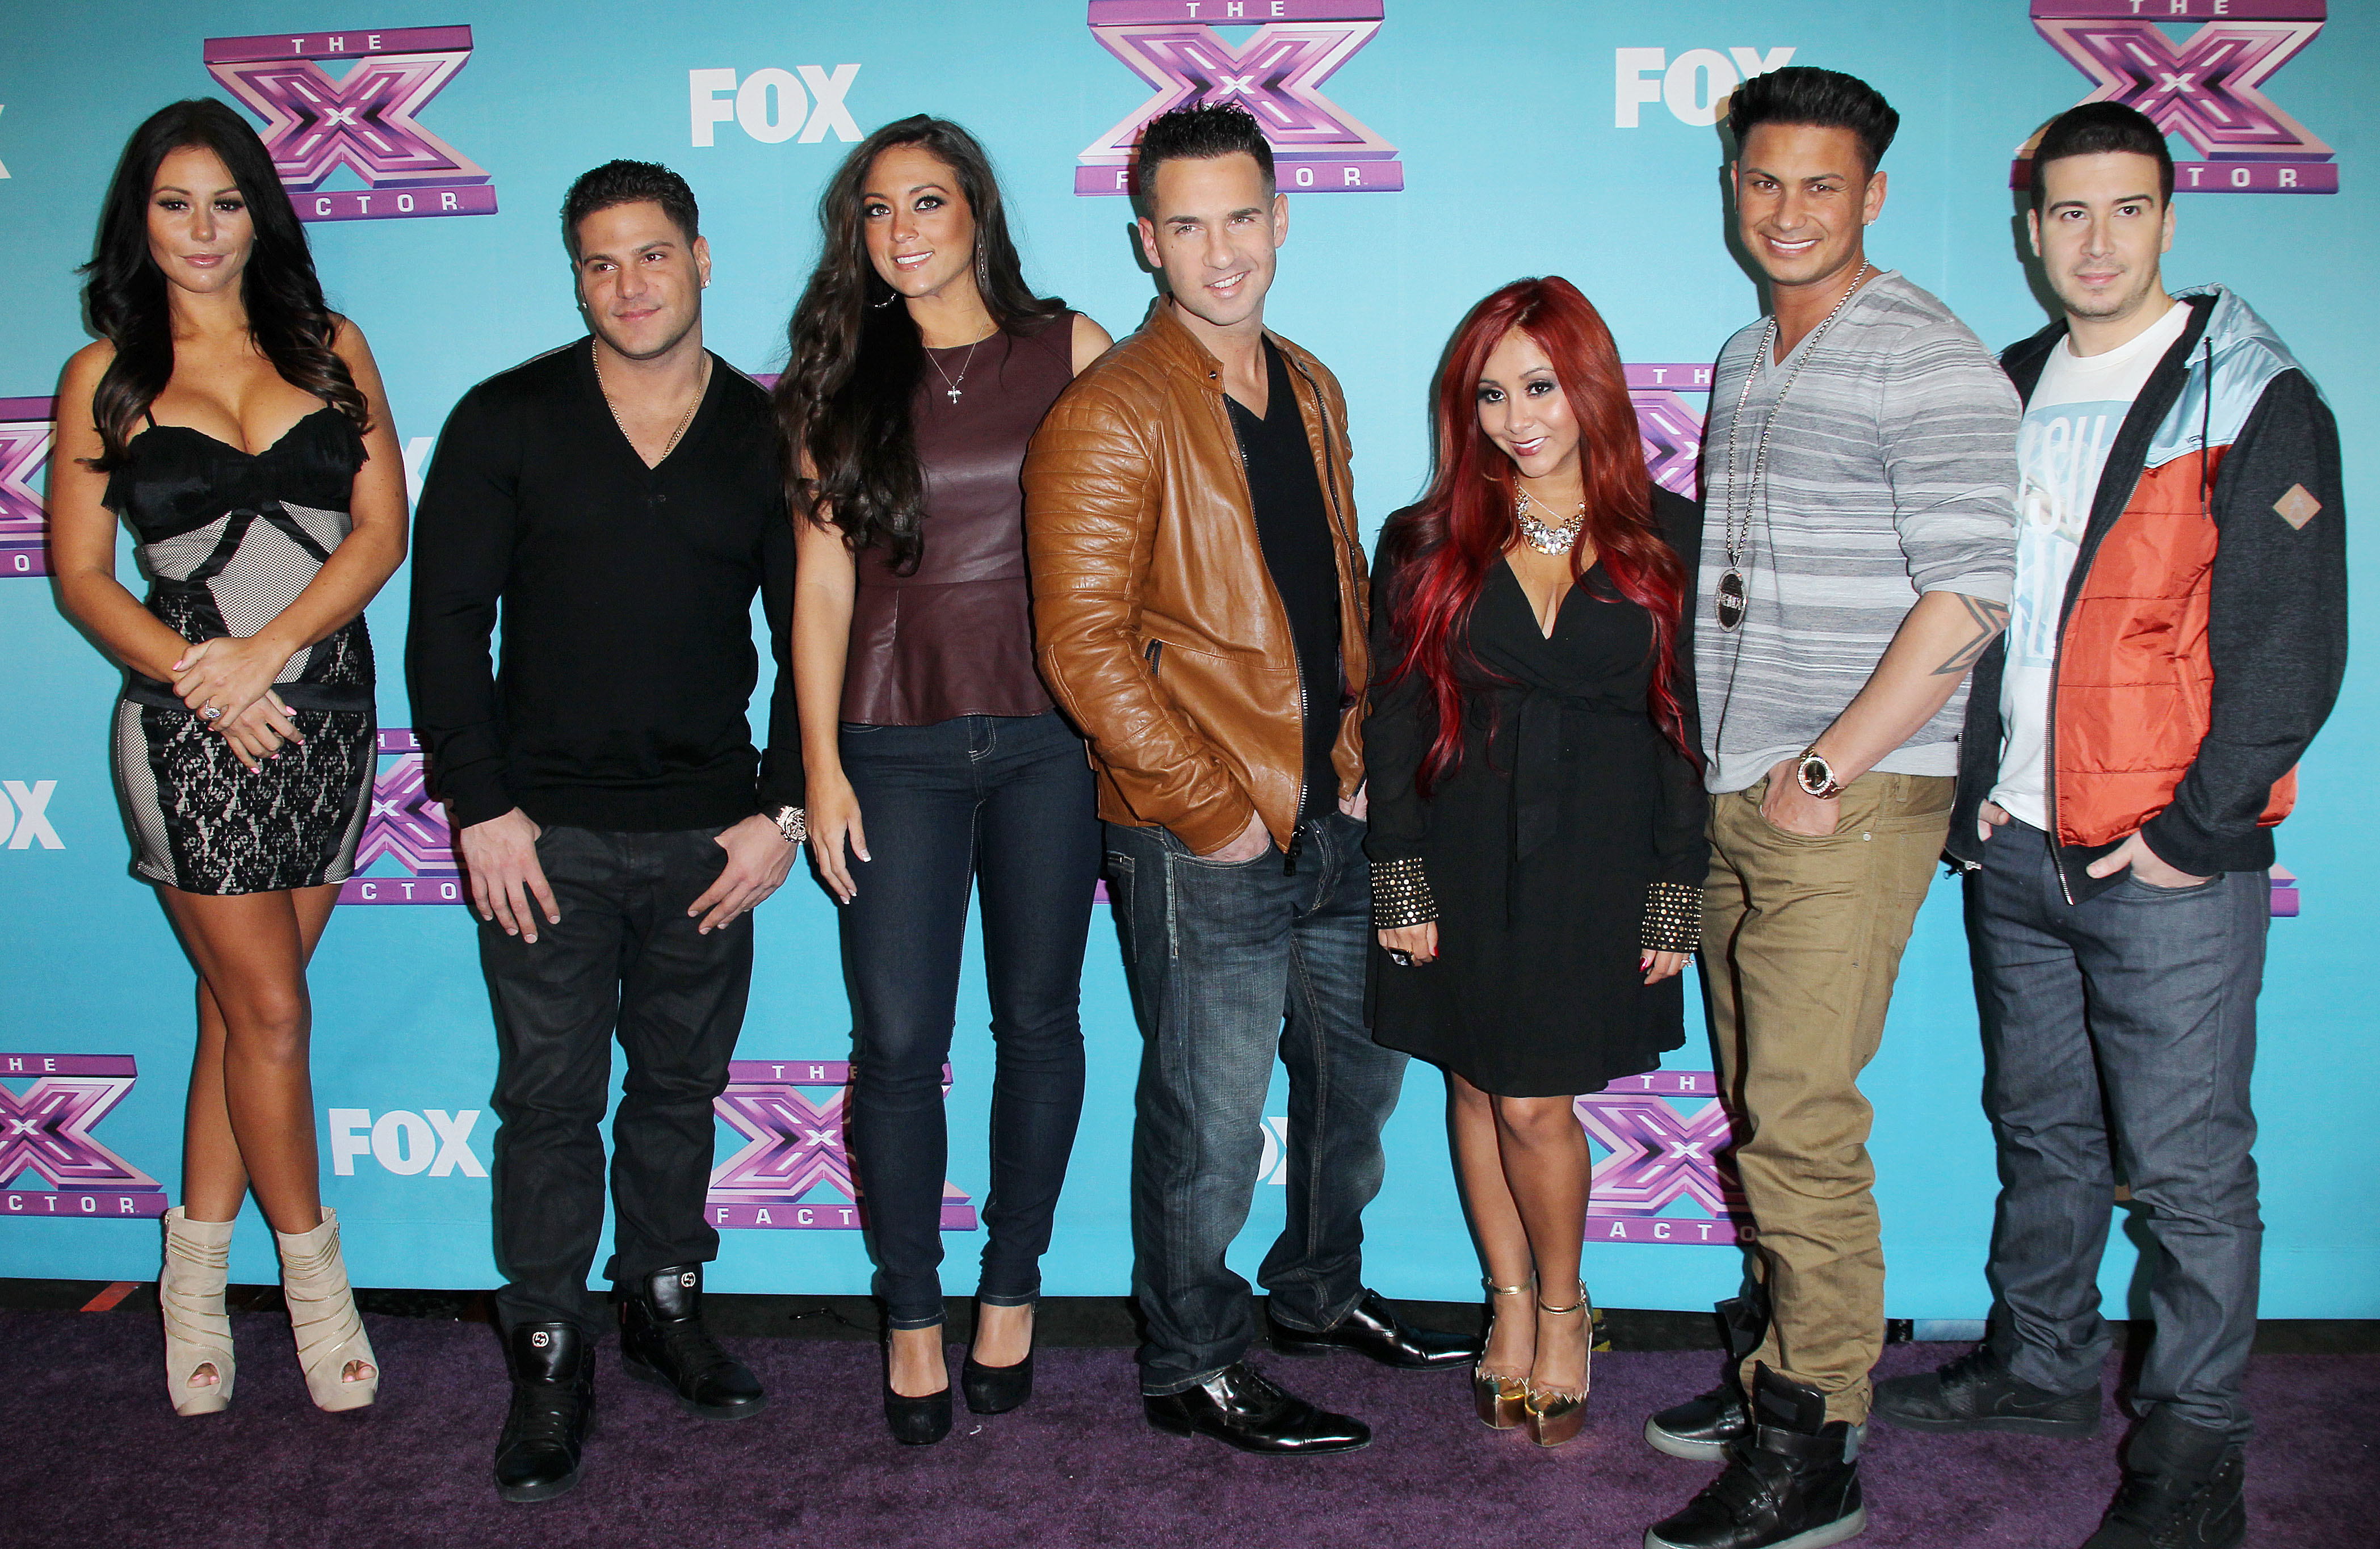 The 'Jersey Shore' Cast: Who Is Single, Dating or Married?